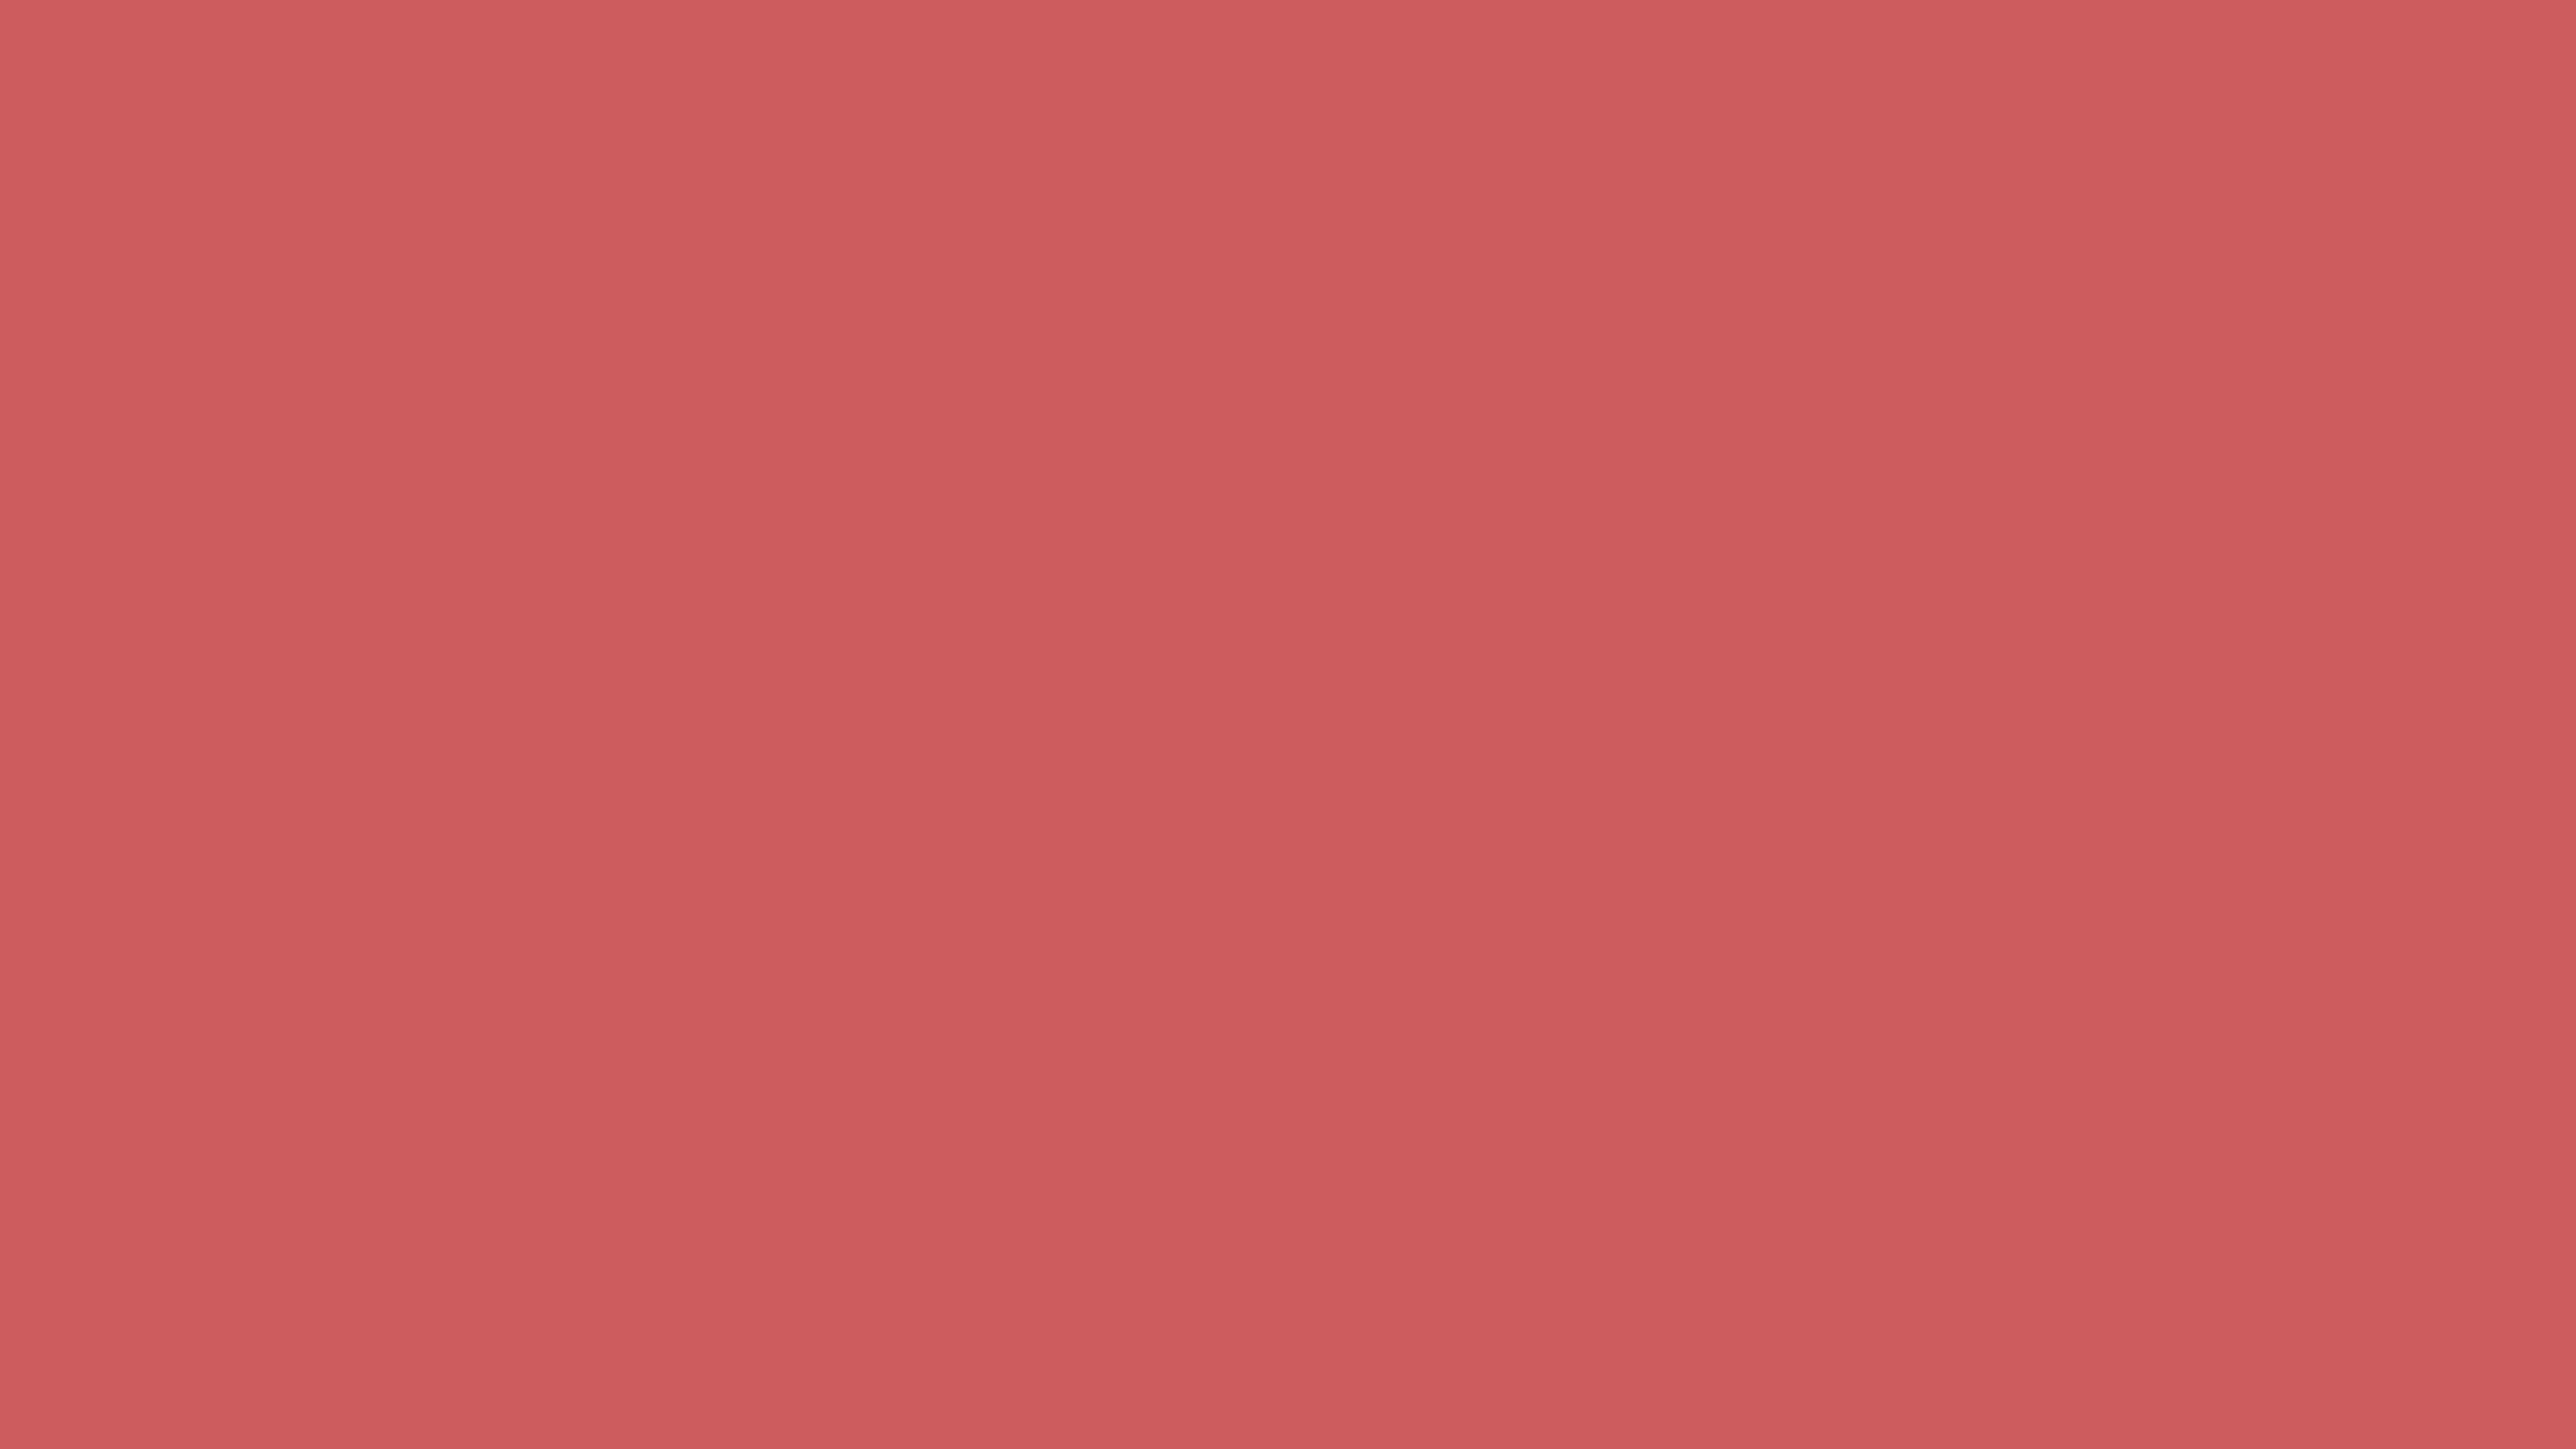 7680x4320 Indian Red Solid Color Background